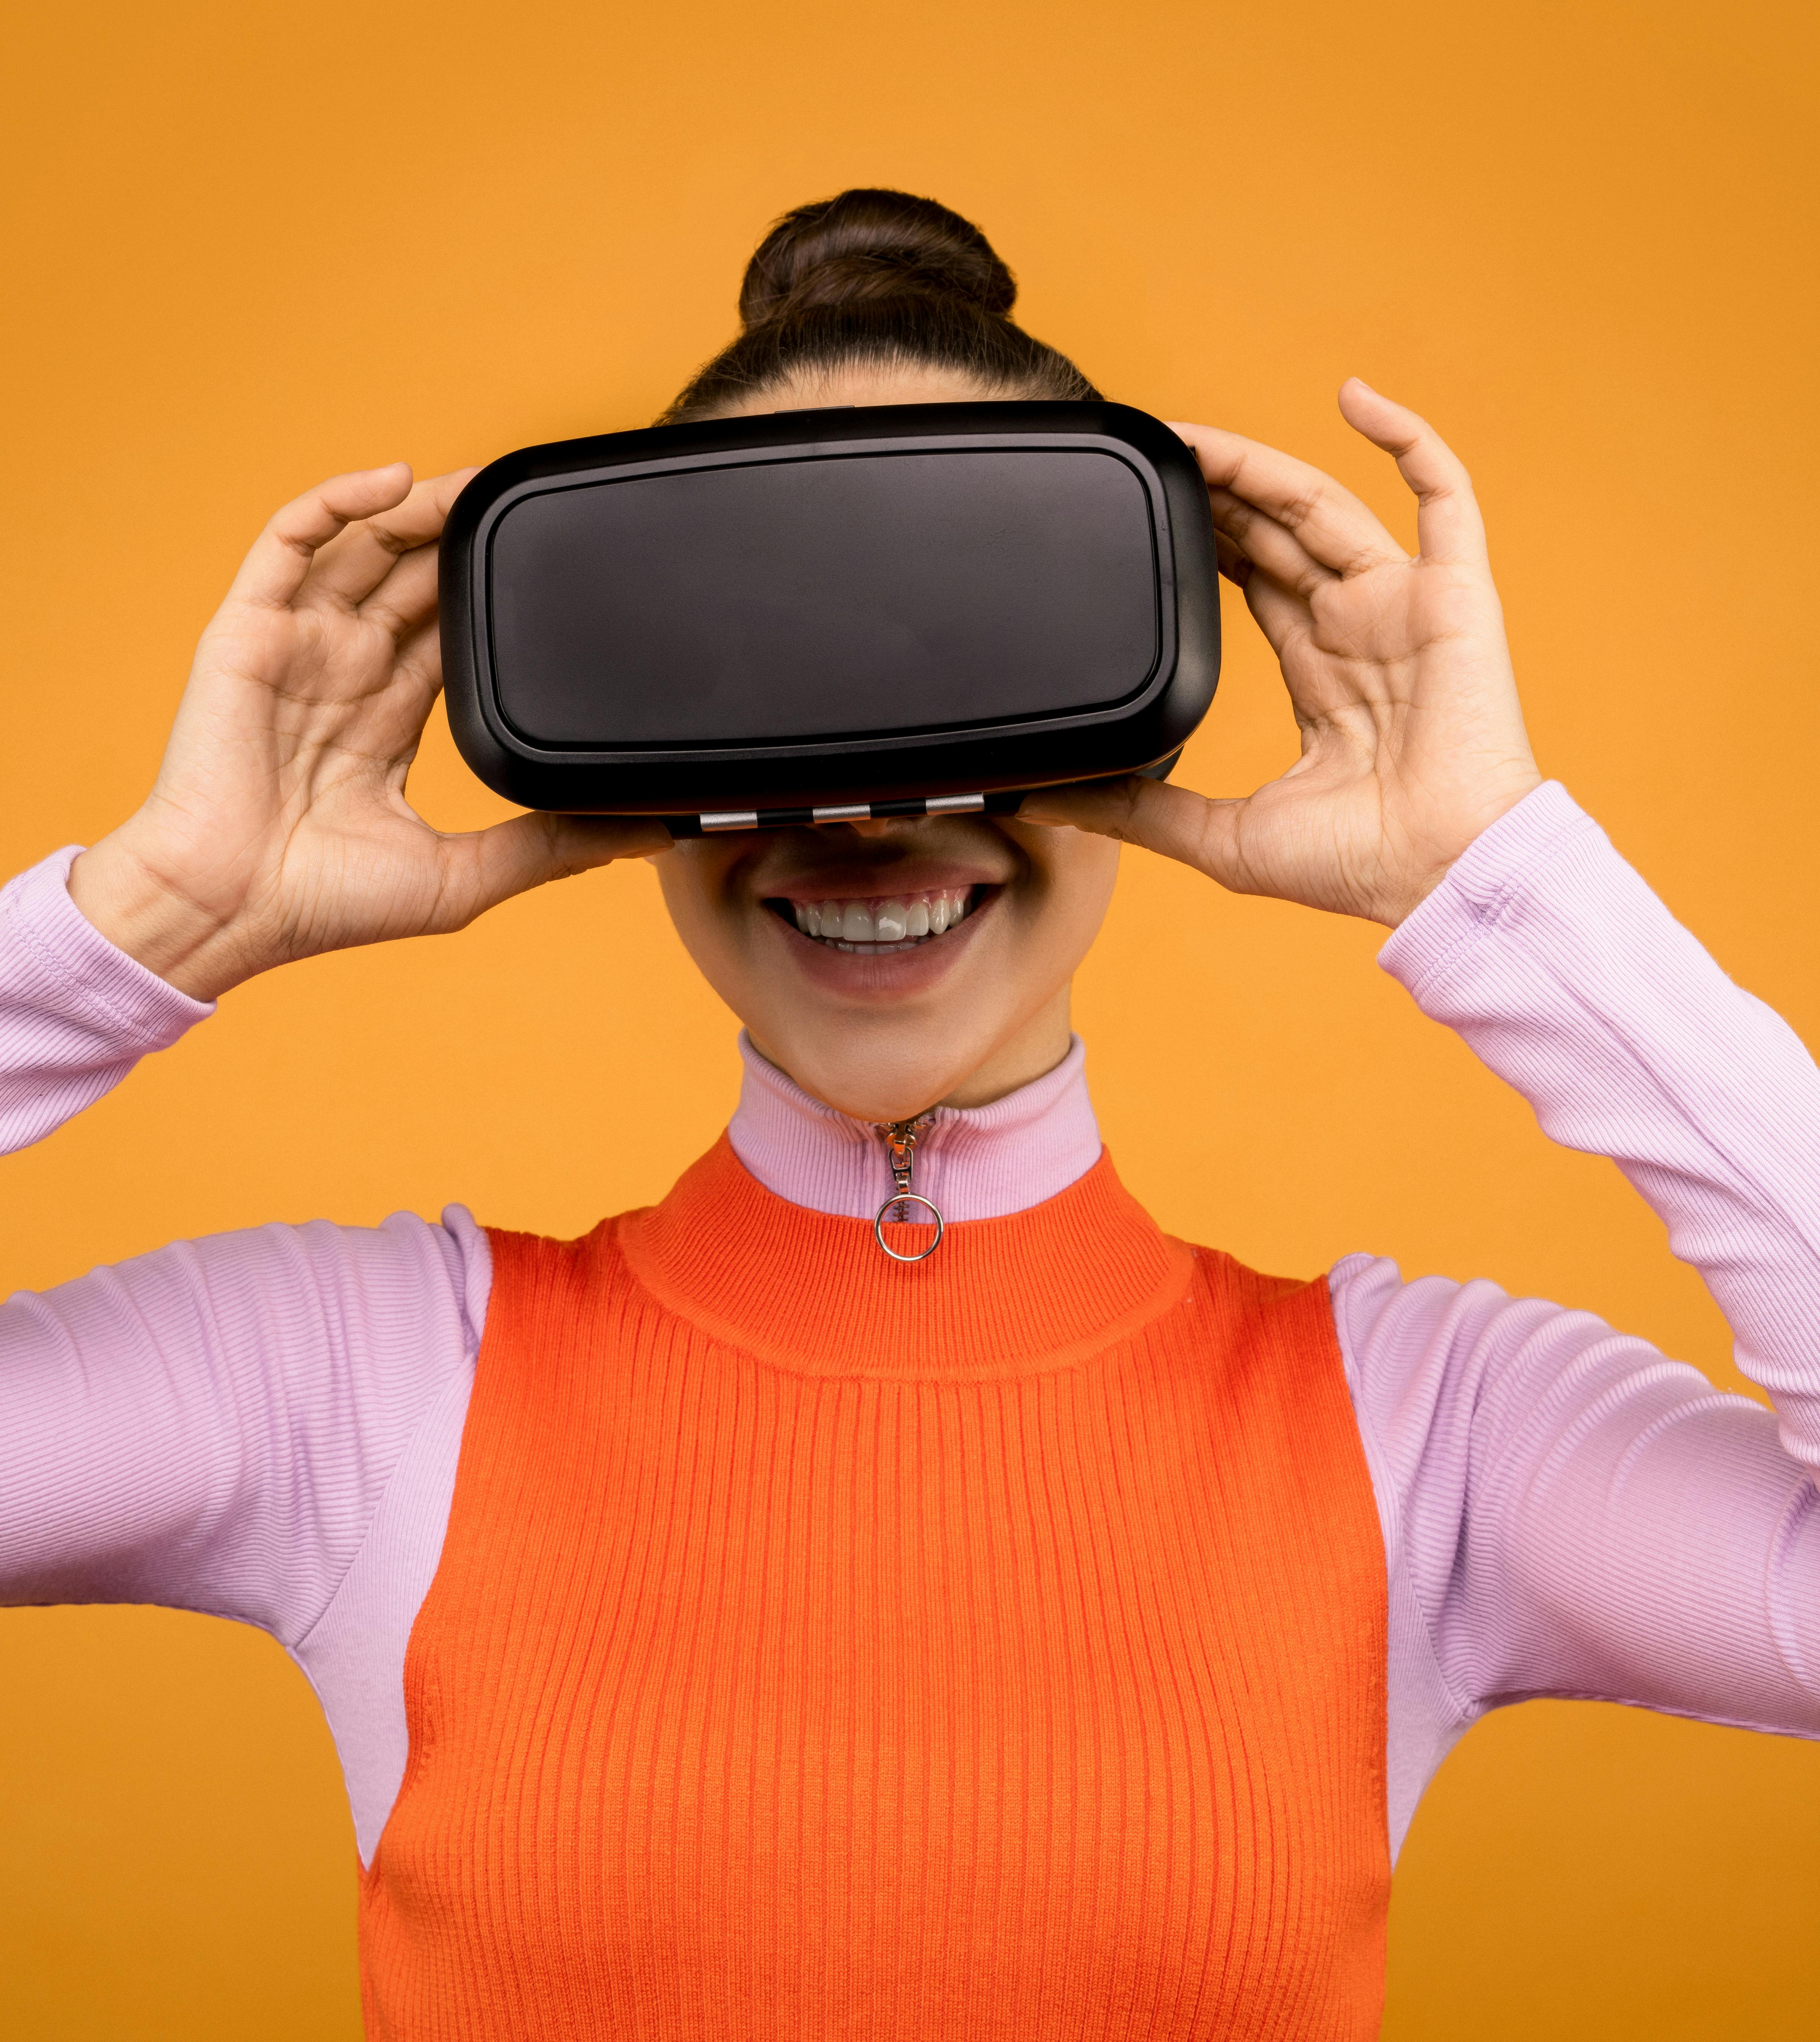 faldskærm overrasket Kalksten Close-Up Photo of a Woman Wearing Vr Goggles · Free Stock Photo